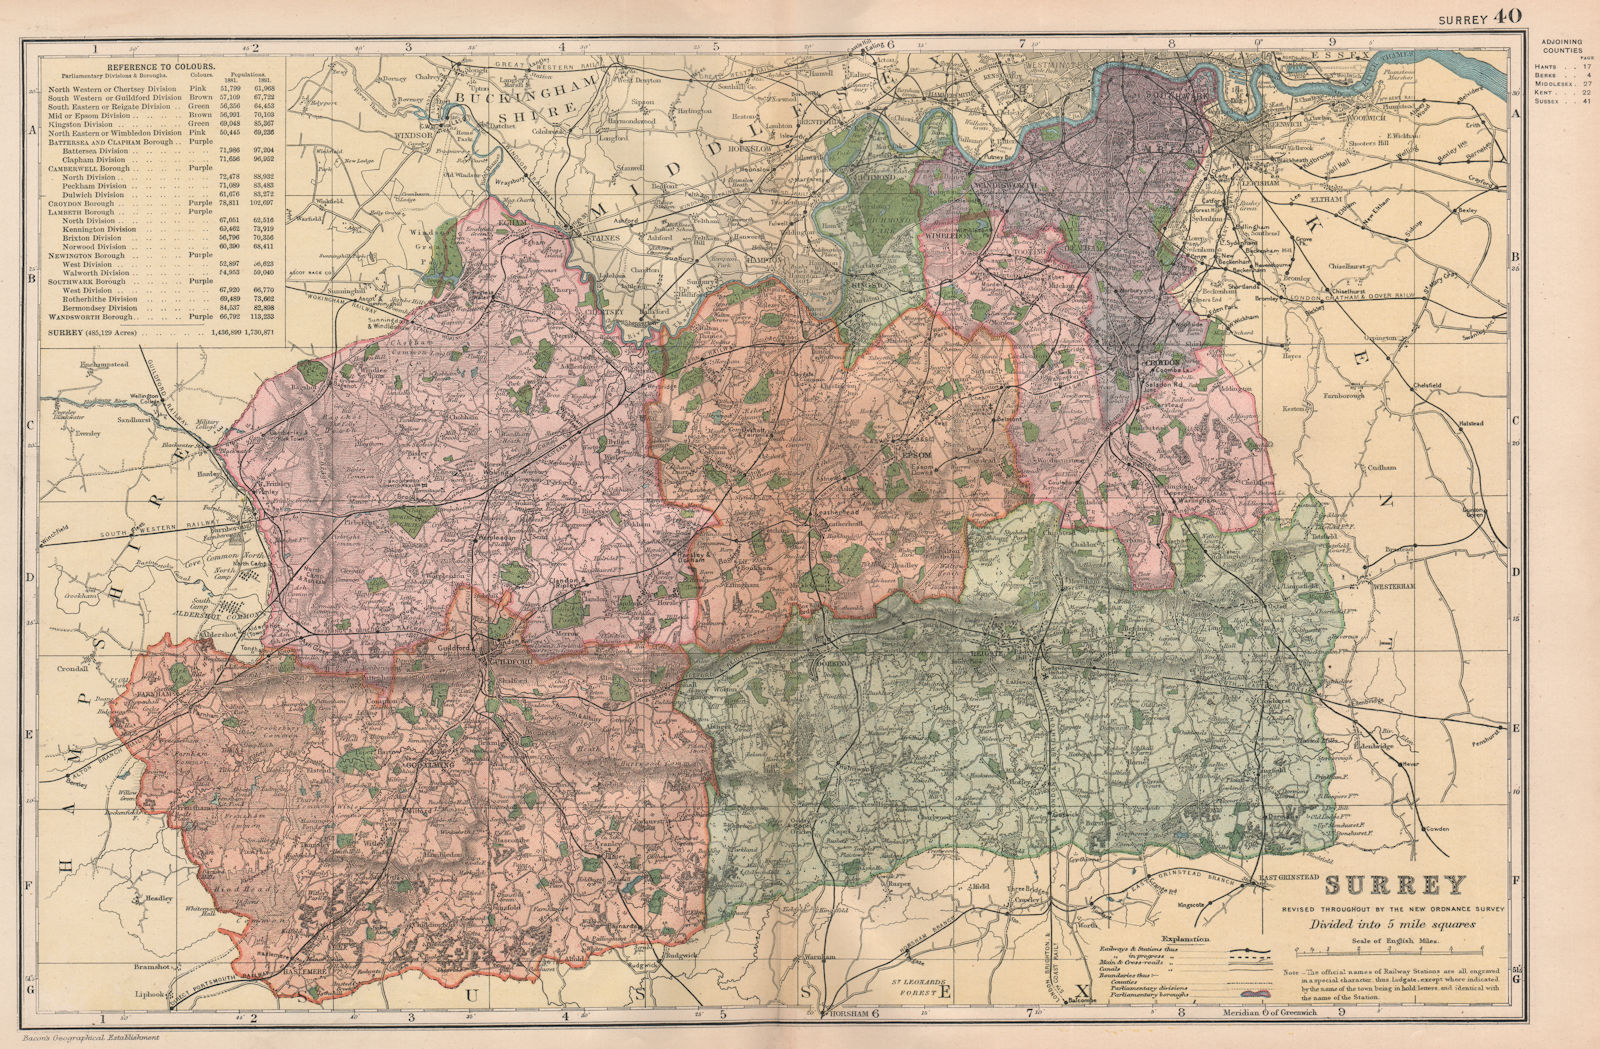 SURREY. Showing Parliamentary divisions, boroughs & parks. BACON 1896 old map